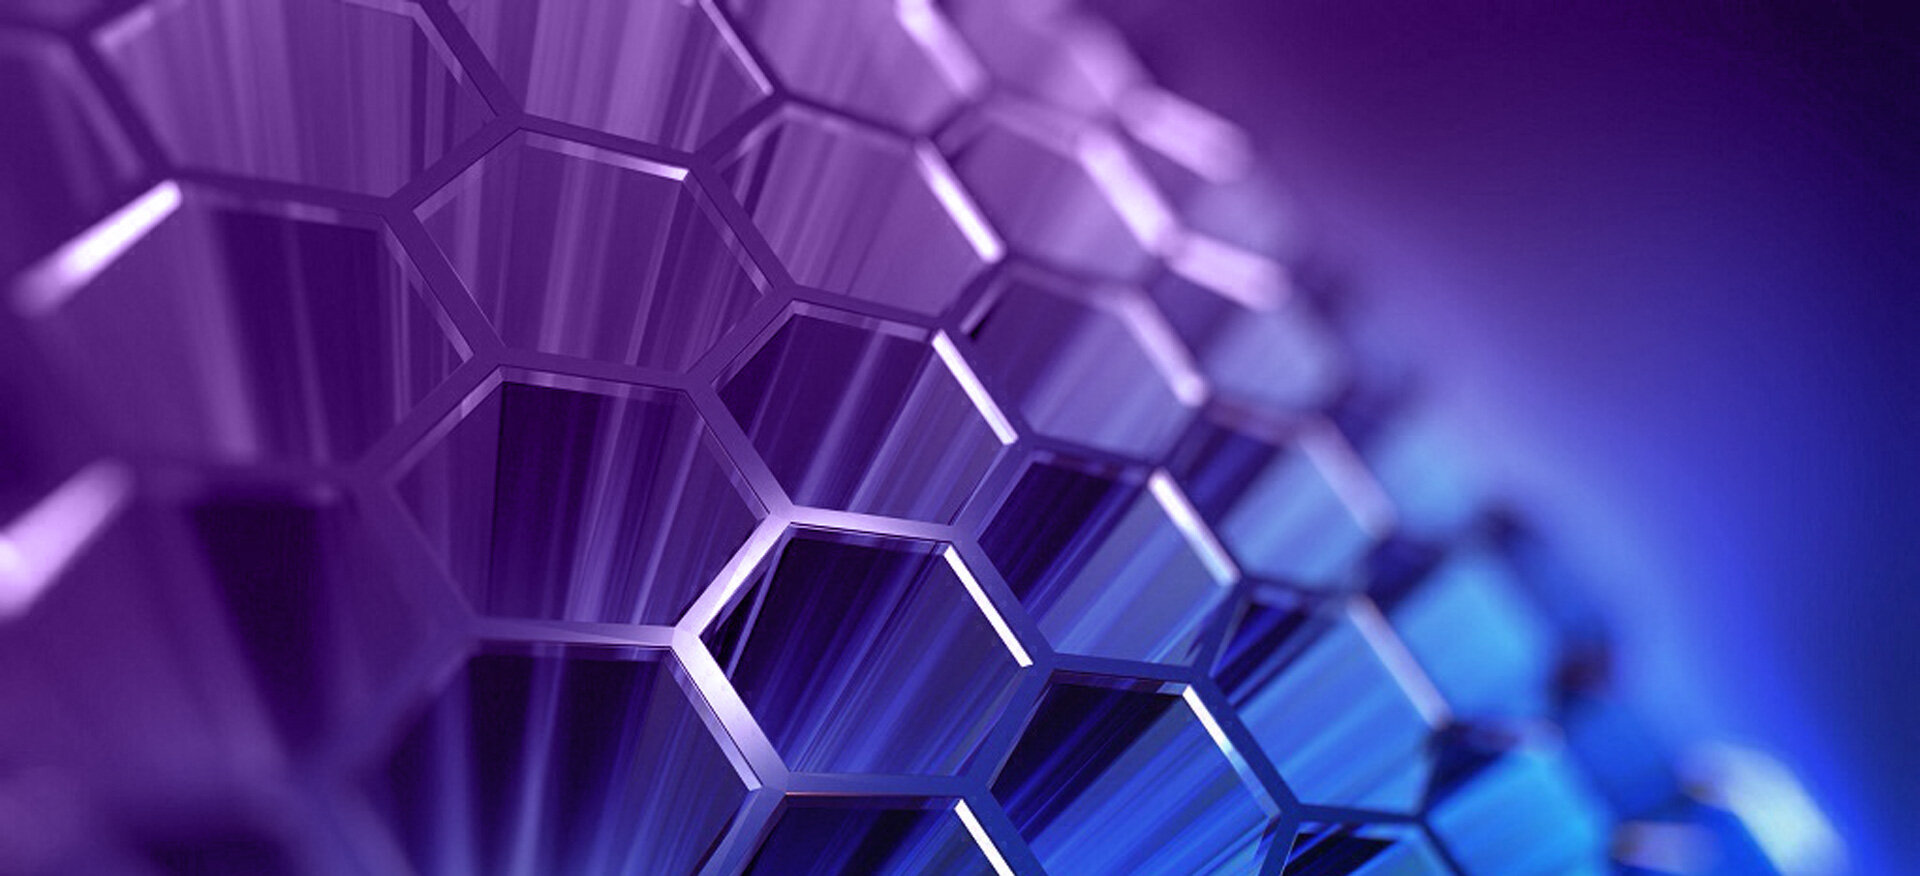 Spintronics in Graphene – 11 PhD & 4 Post-Doctoral Positions available